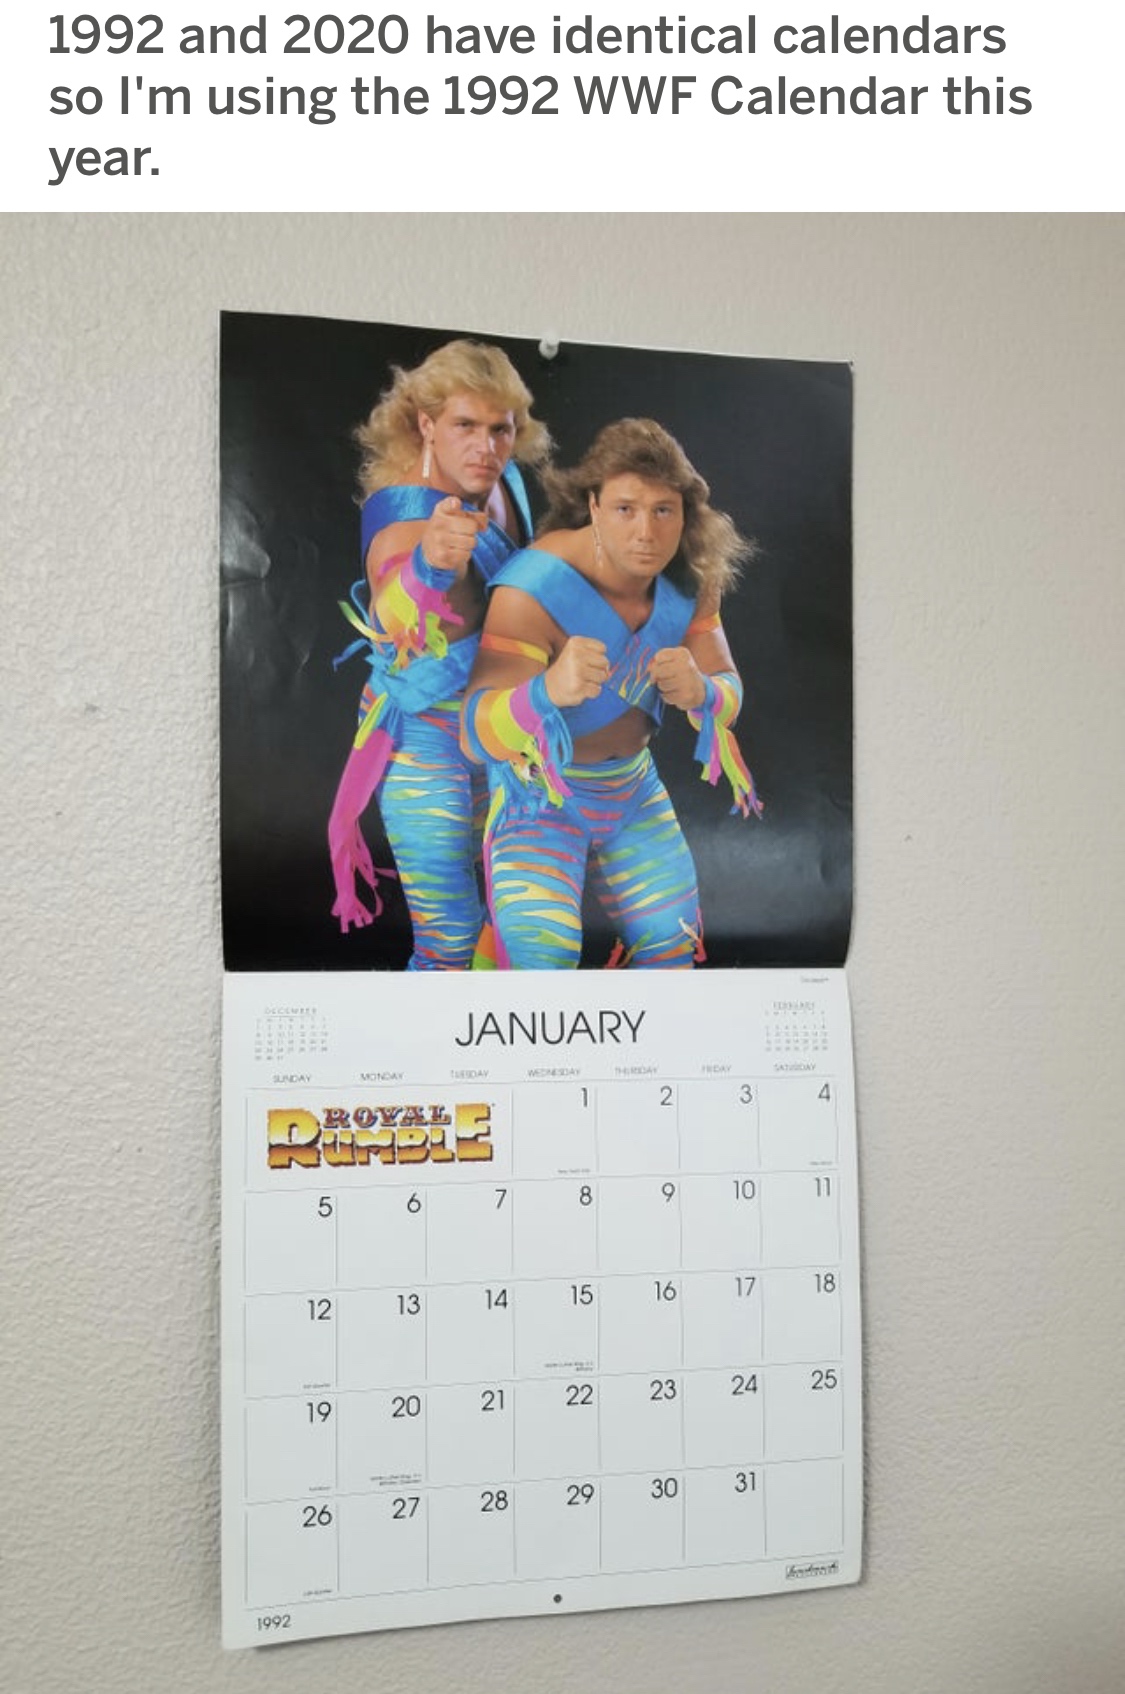 calendar - 1992 and 2020 have identical calendars so I'm using the 1992 Wwf Calendar this year. January Unday 2 3 4 5 6 7 8 9 10 11 14 12 13 15 16 17 18 19 20 21 22 23 24 25 26 27 28 29 30 31 1992